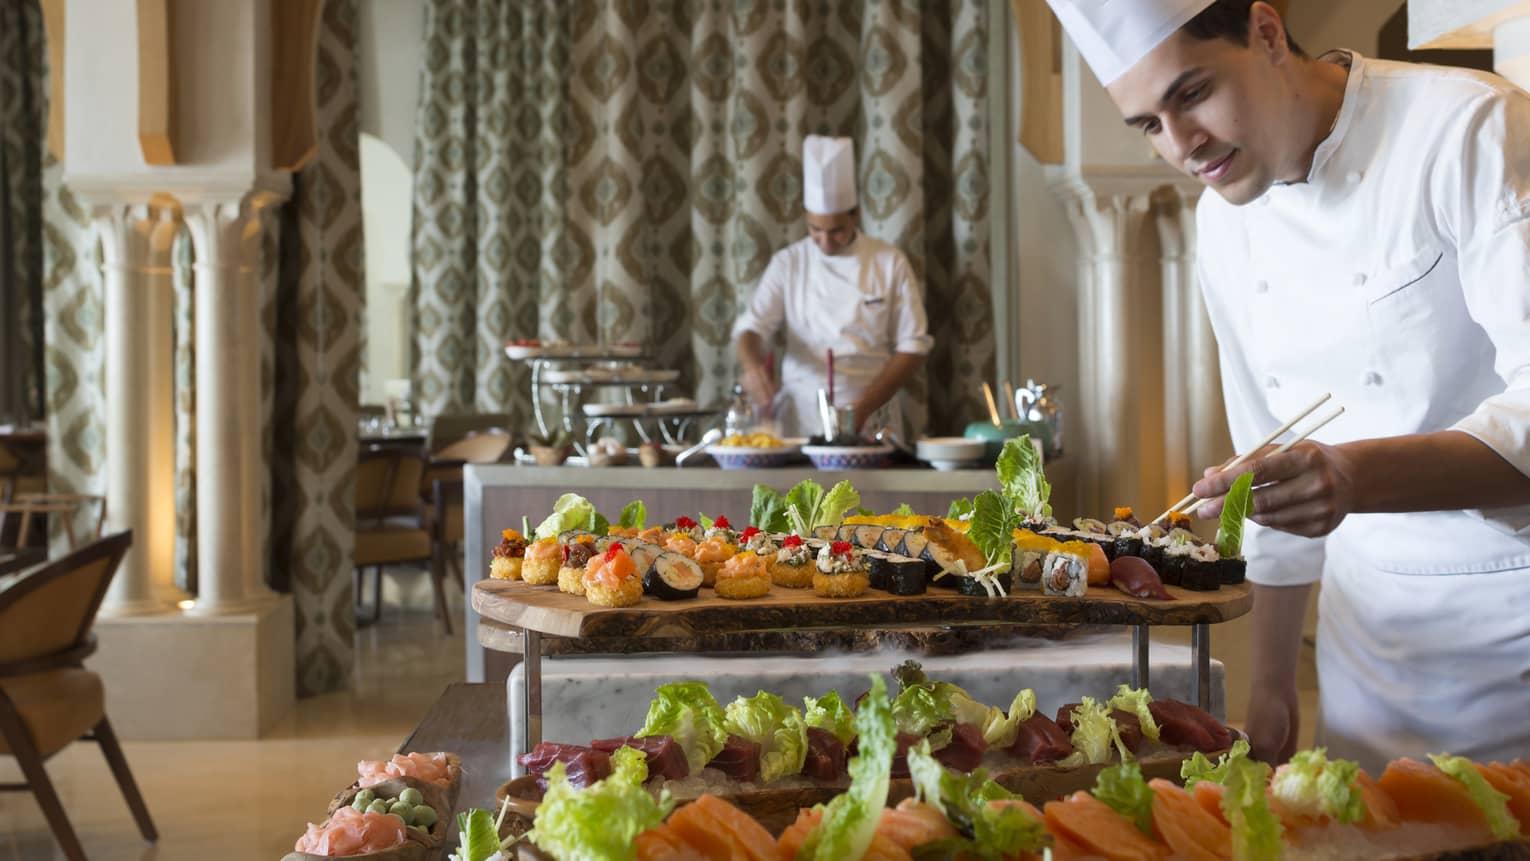 Chef places Brunch Sushi on buffet platters in dining room